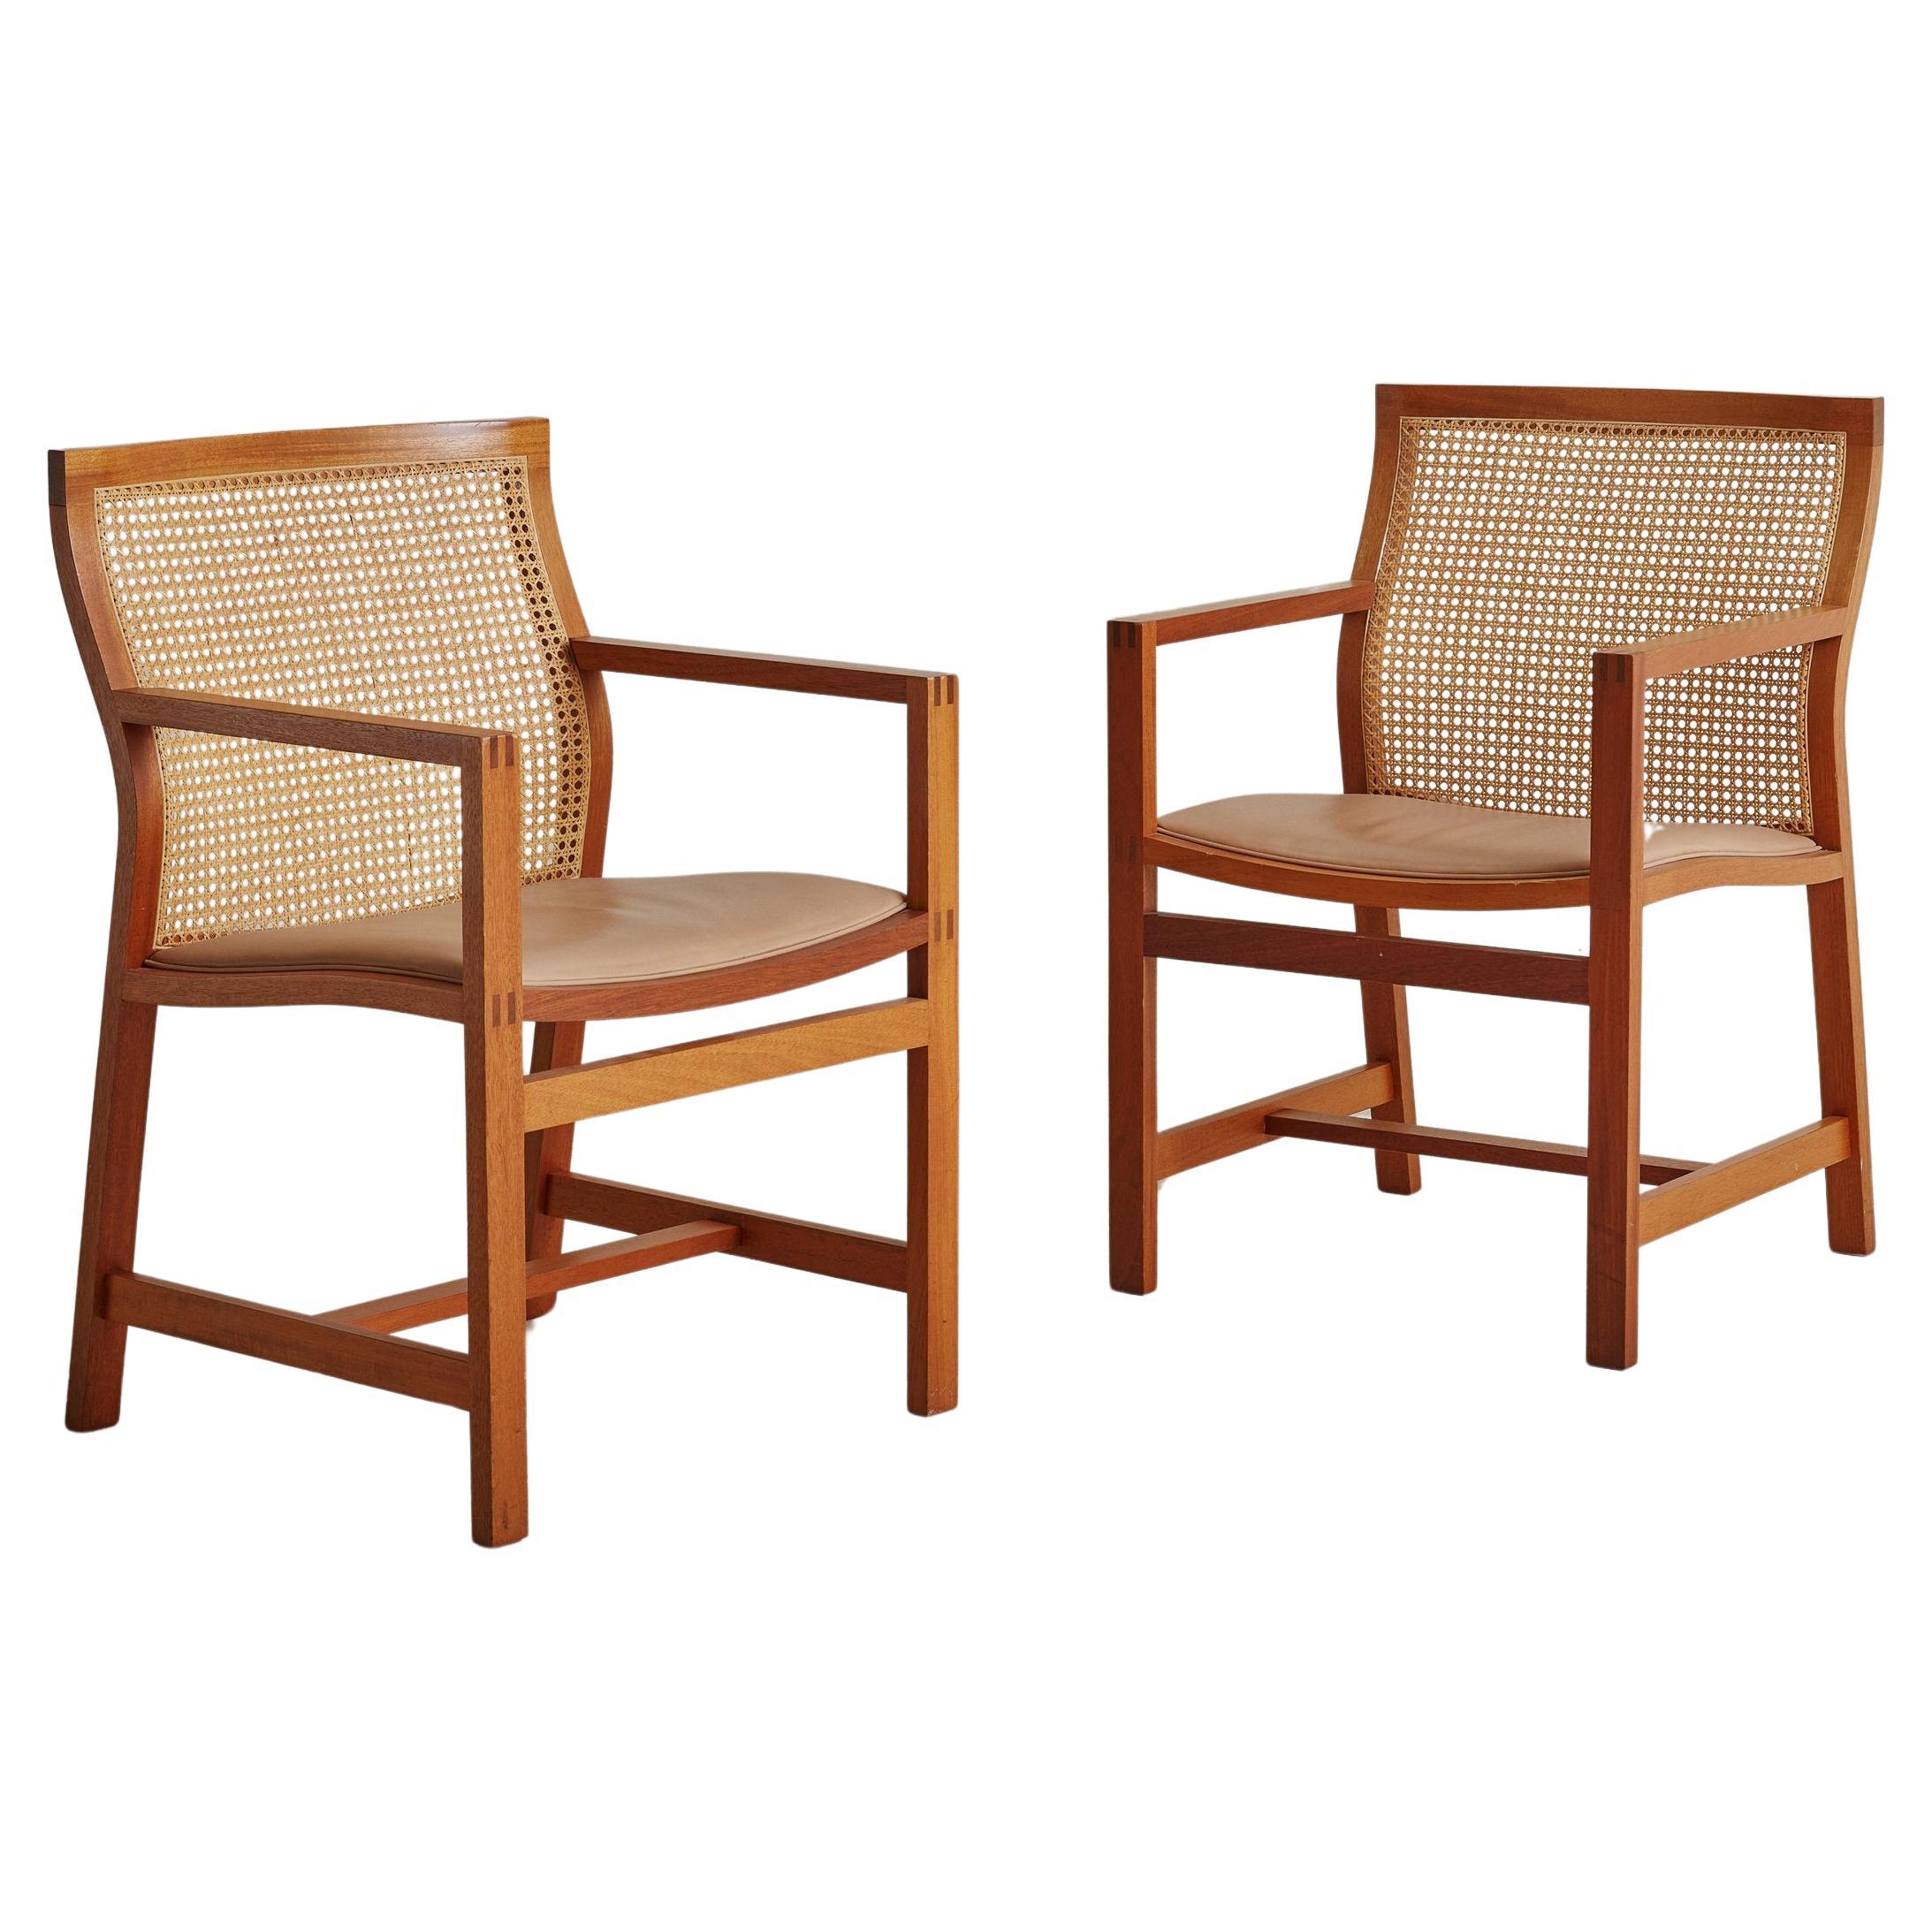 Set of 6 Cane Dining Chairs by Rud Thygesen and Johnny Sorensen for Botium 1980s For Sale